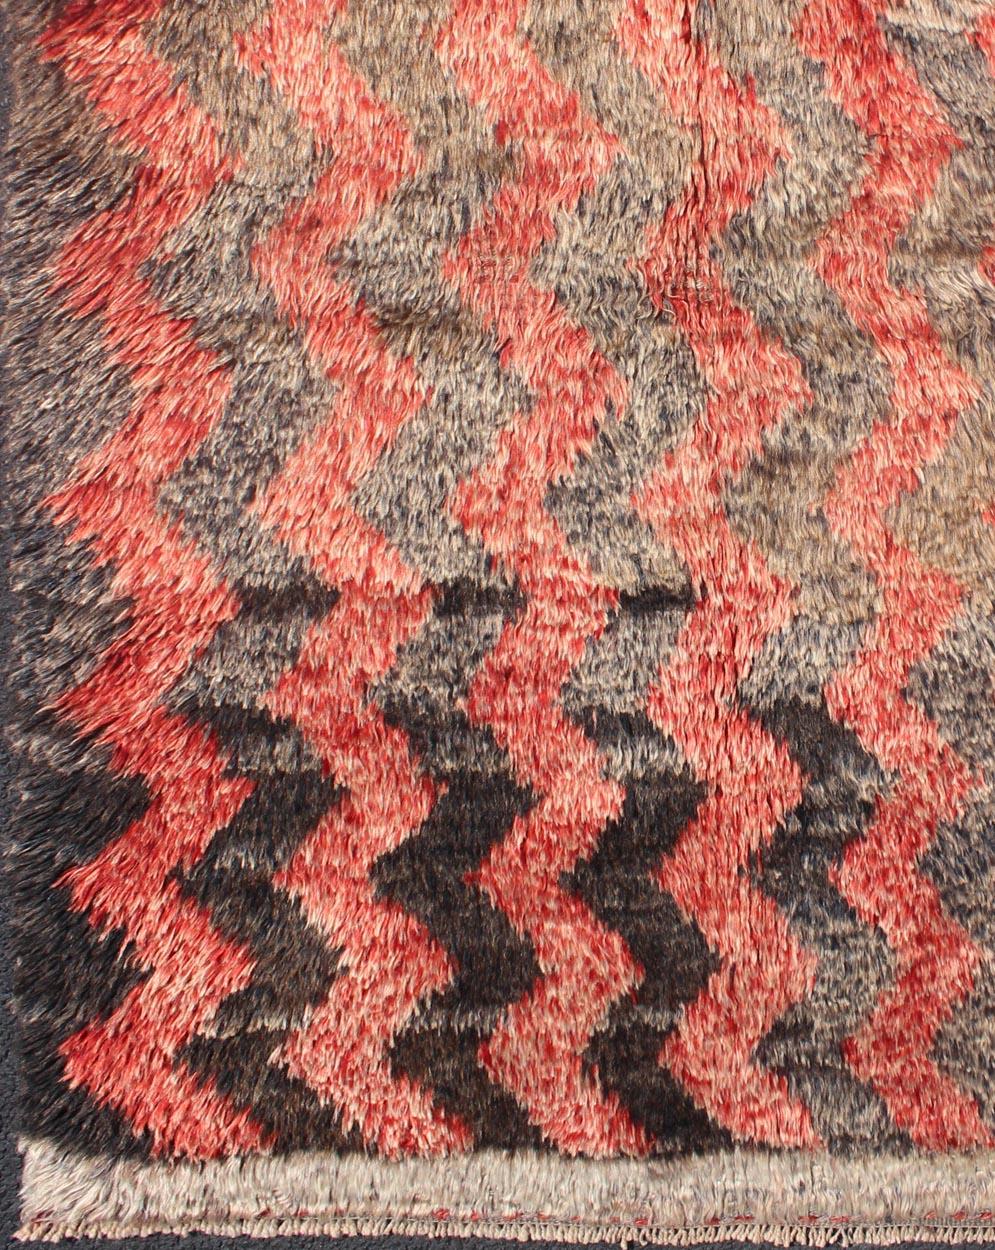 Vintage Tulu Carpet with Zig-Zag Stripe Pattern in Gray, Charcoal and Red

Measures: 3'3 x 4'10.  

Turkish Tulu Carpet with Moroccan design in rows of Zig-Zag. Keivan Woven Arts/ rug#EN-140793, origin/turkey
This high pile shaggy Tulu rug is